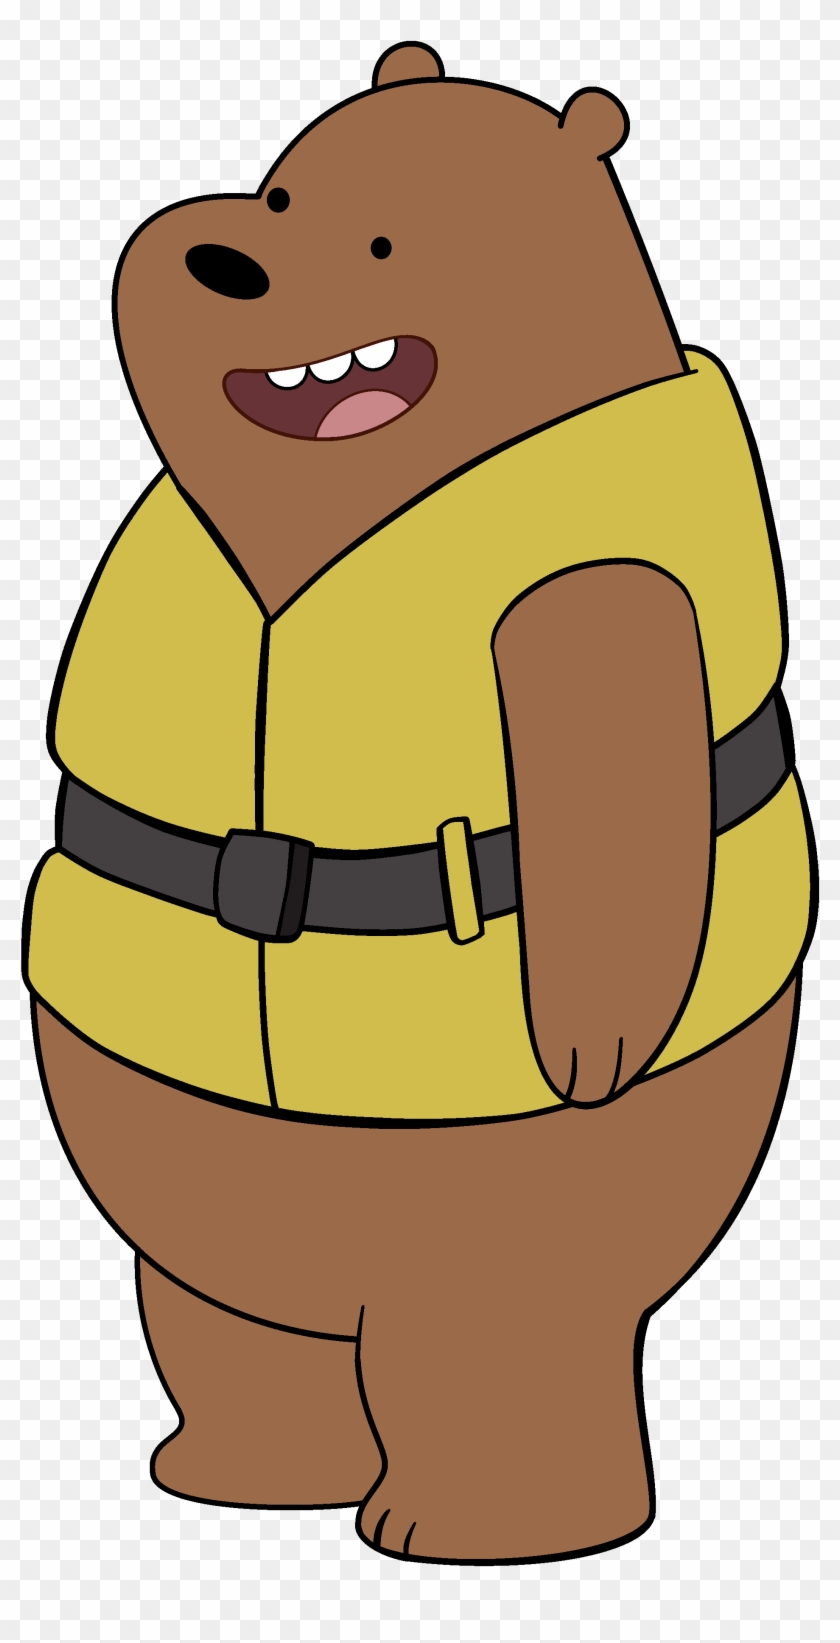 https://www.clipartmax.com/png/middle/351-3519884_image-life-png-we-bare-bears-wiki-bare-bear-grizzly-bear.png